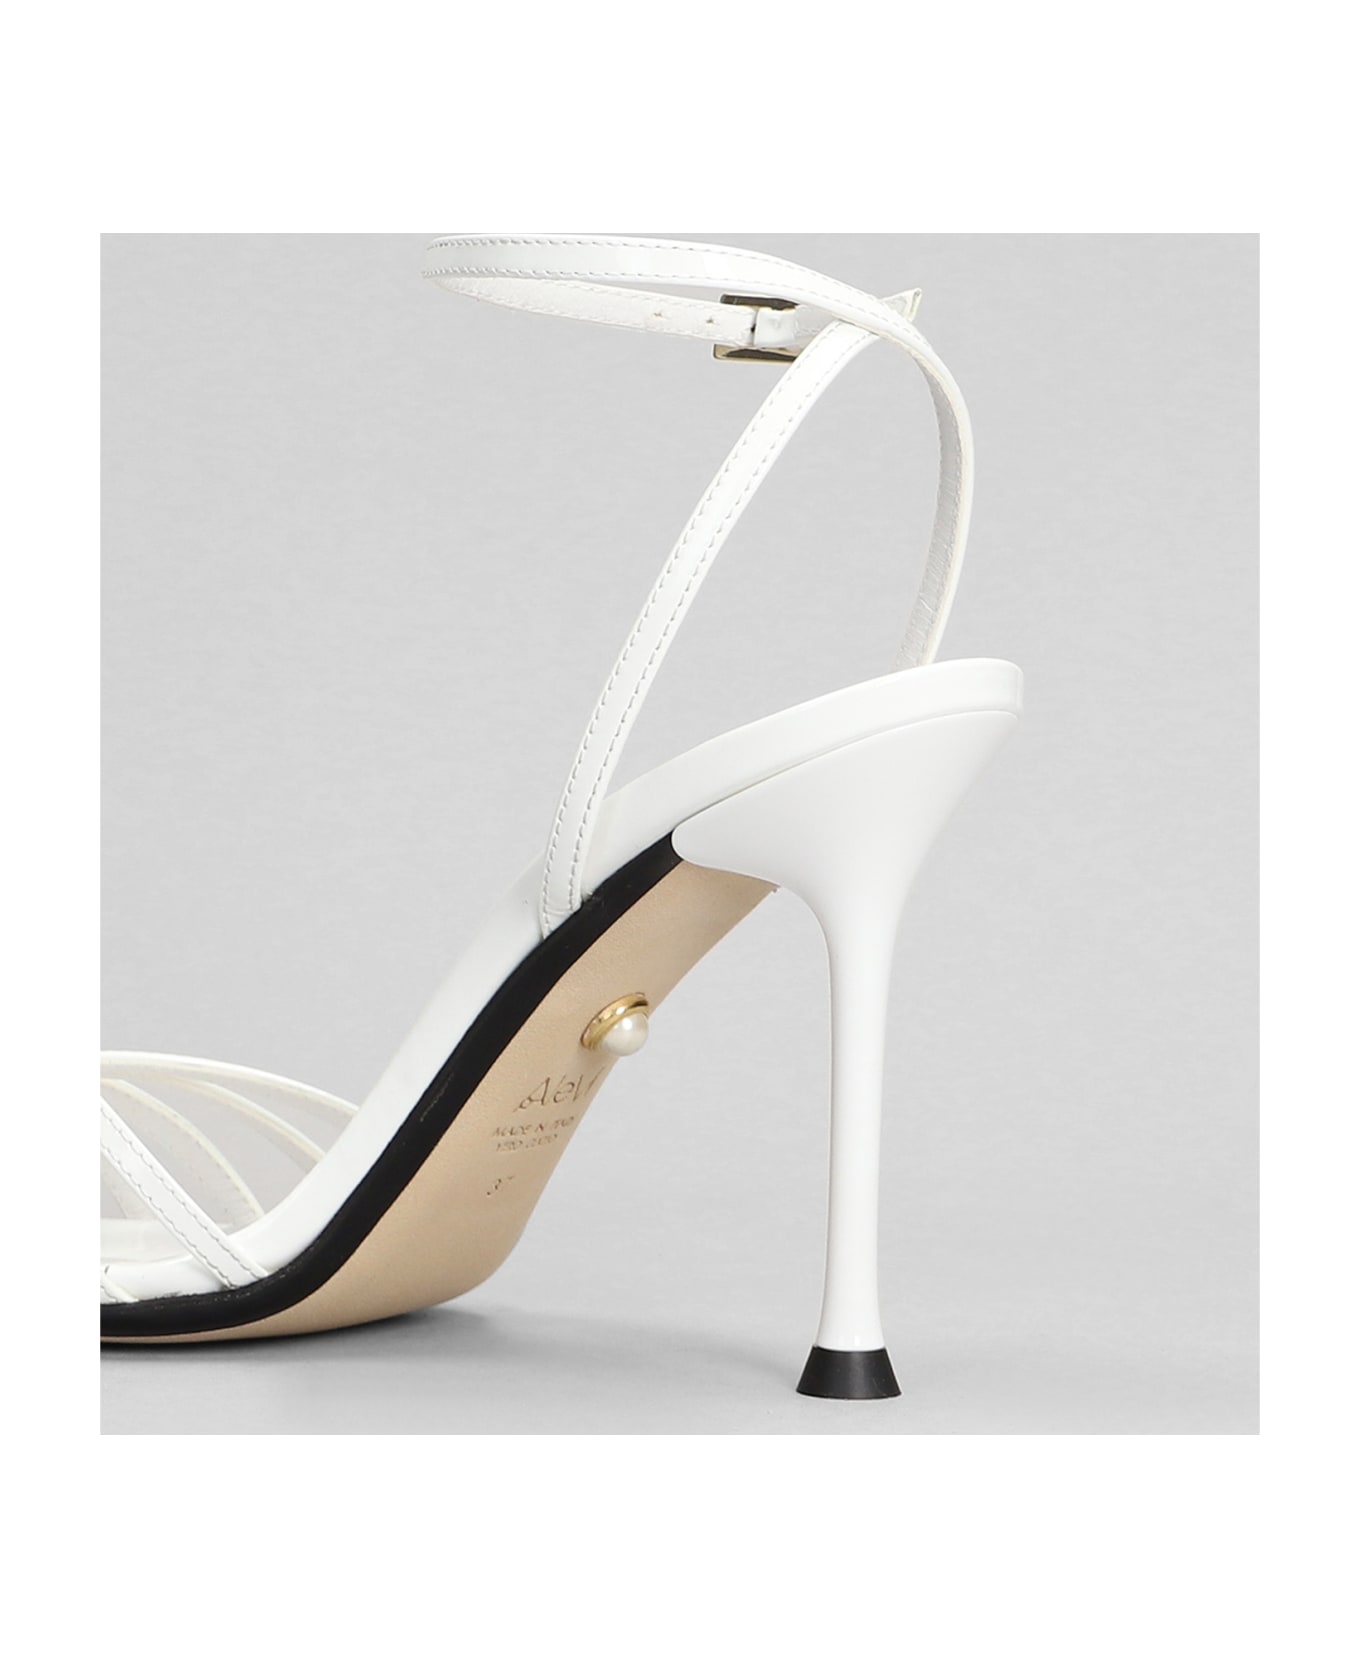 Alevì Ally 095 Sandals In White Patent Leather - white